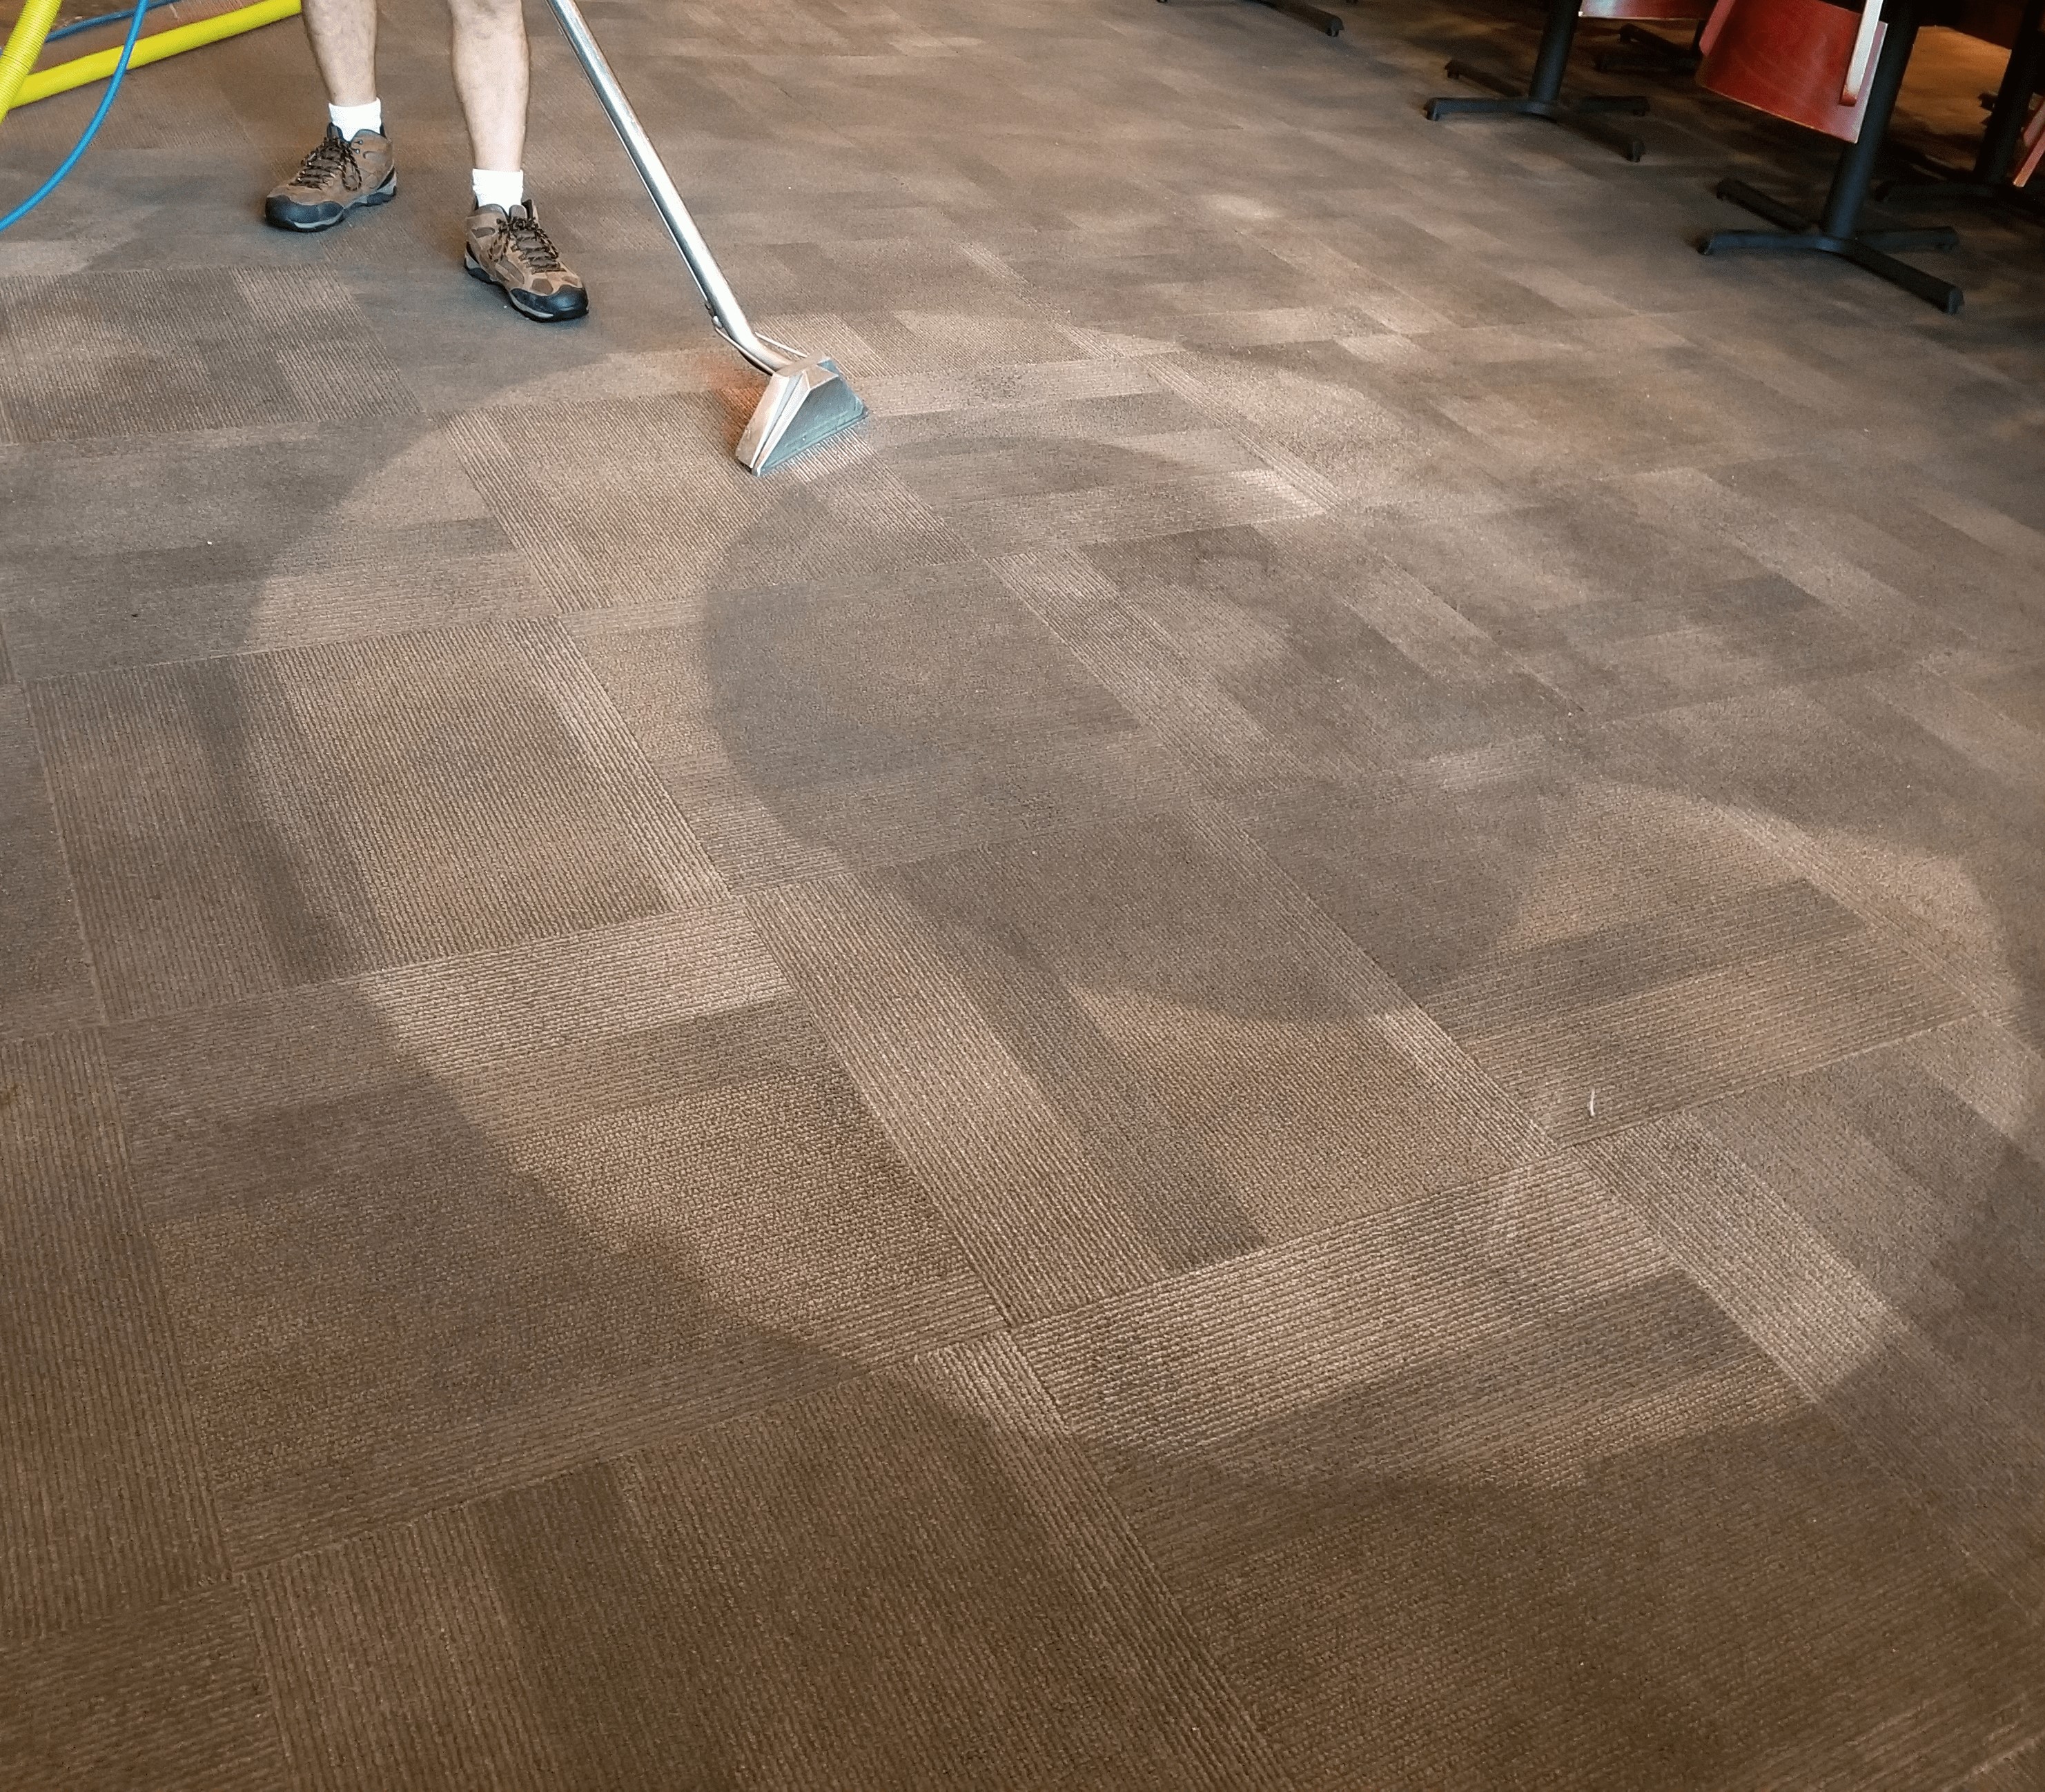 A man cleaning the carpets in a Plano Texas restaurant